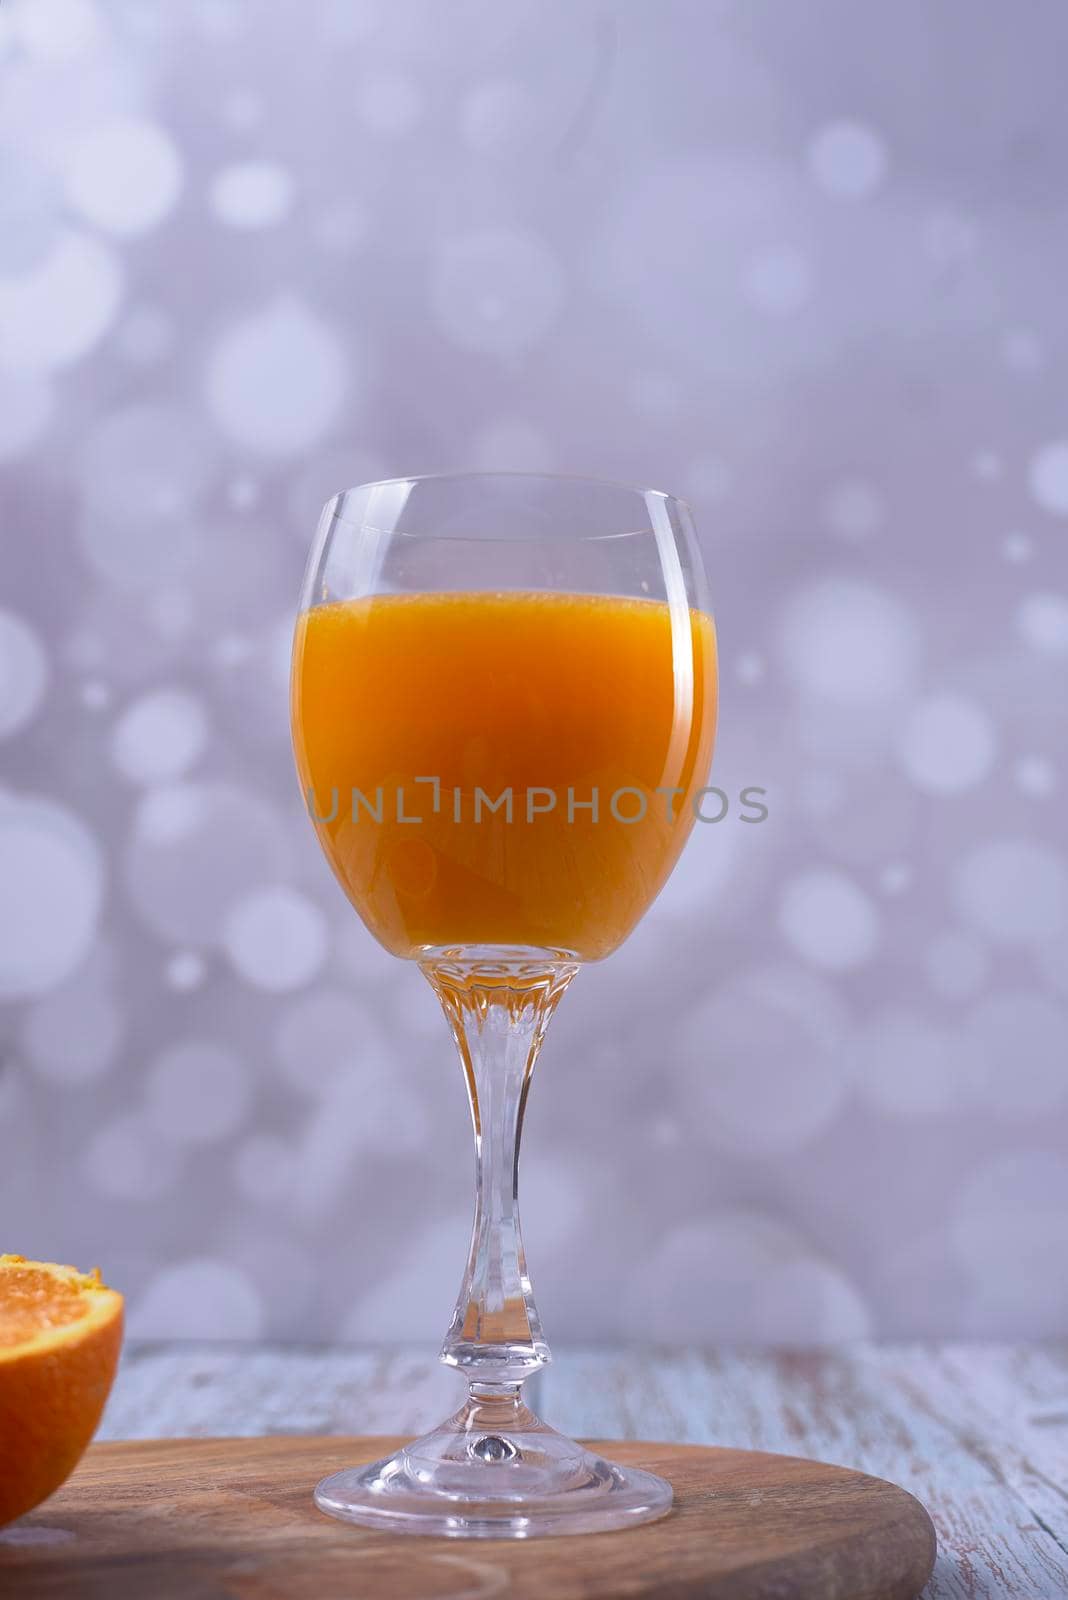 Glass of orange juice on wooden table bright background, front view